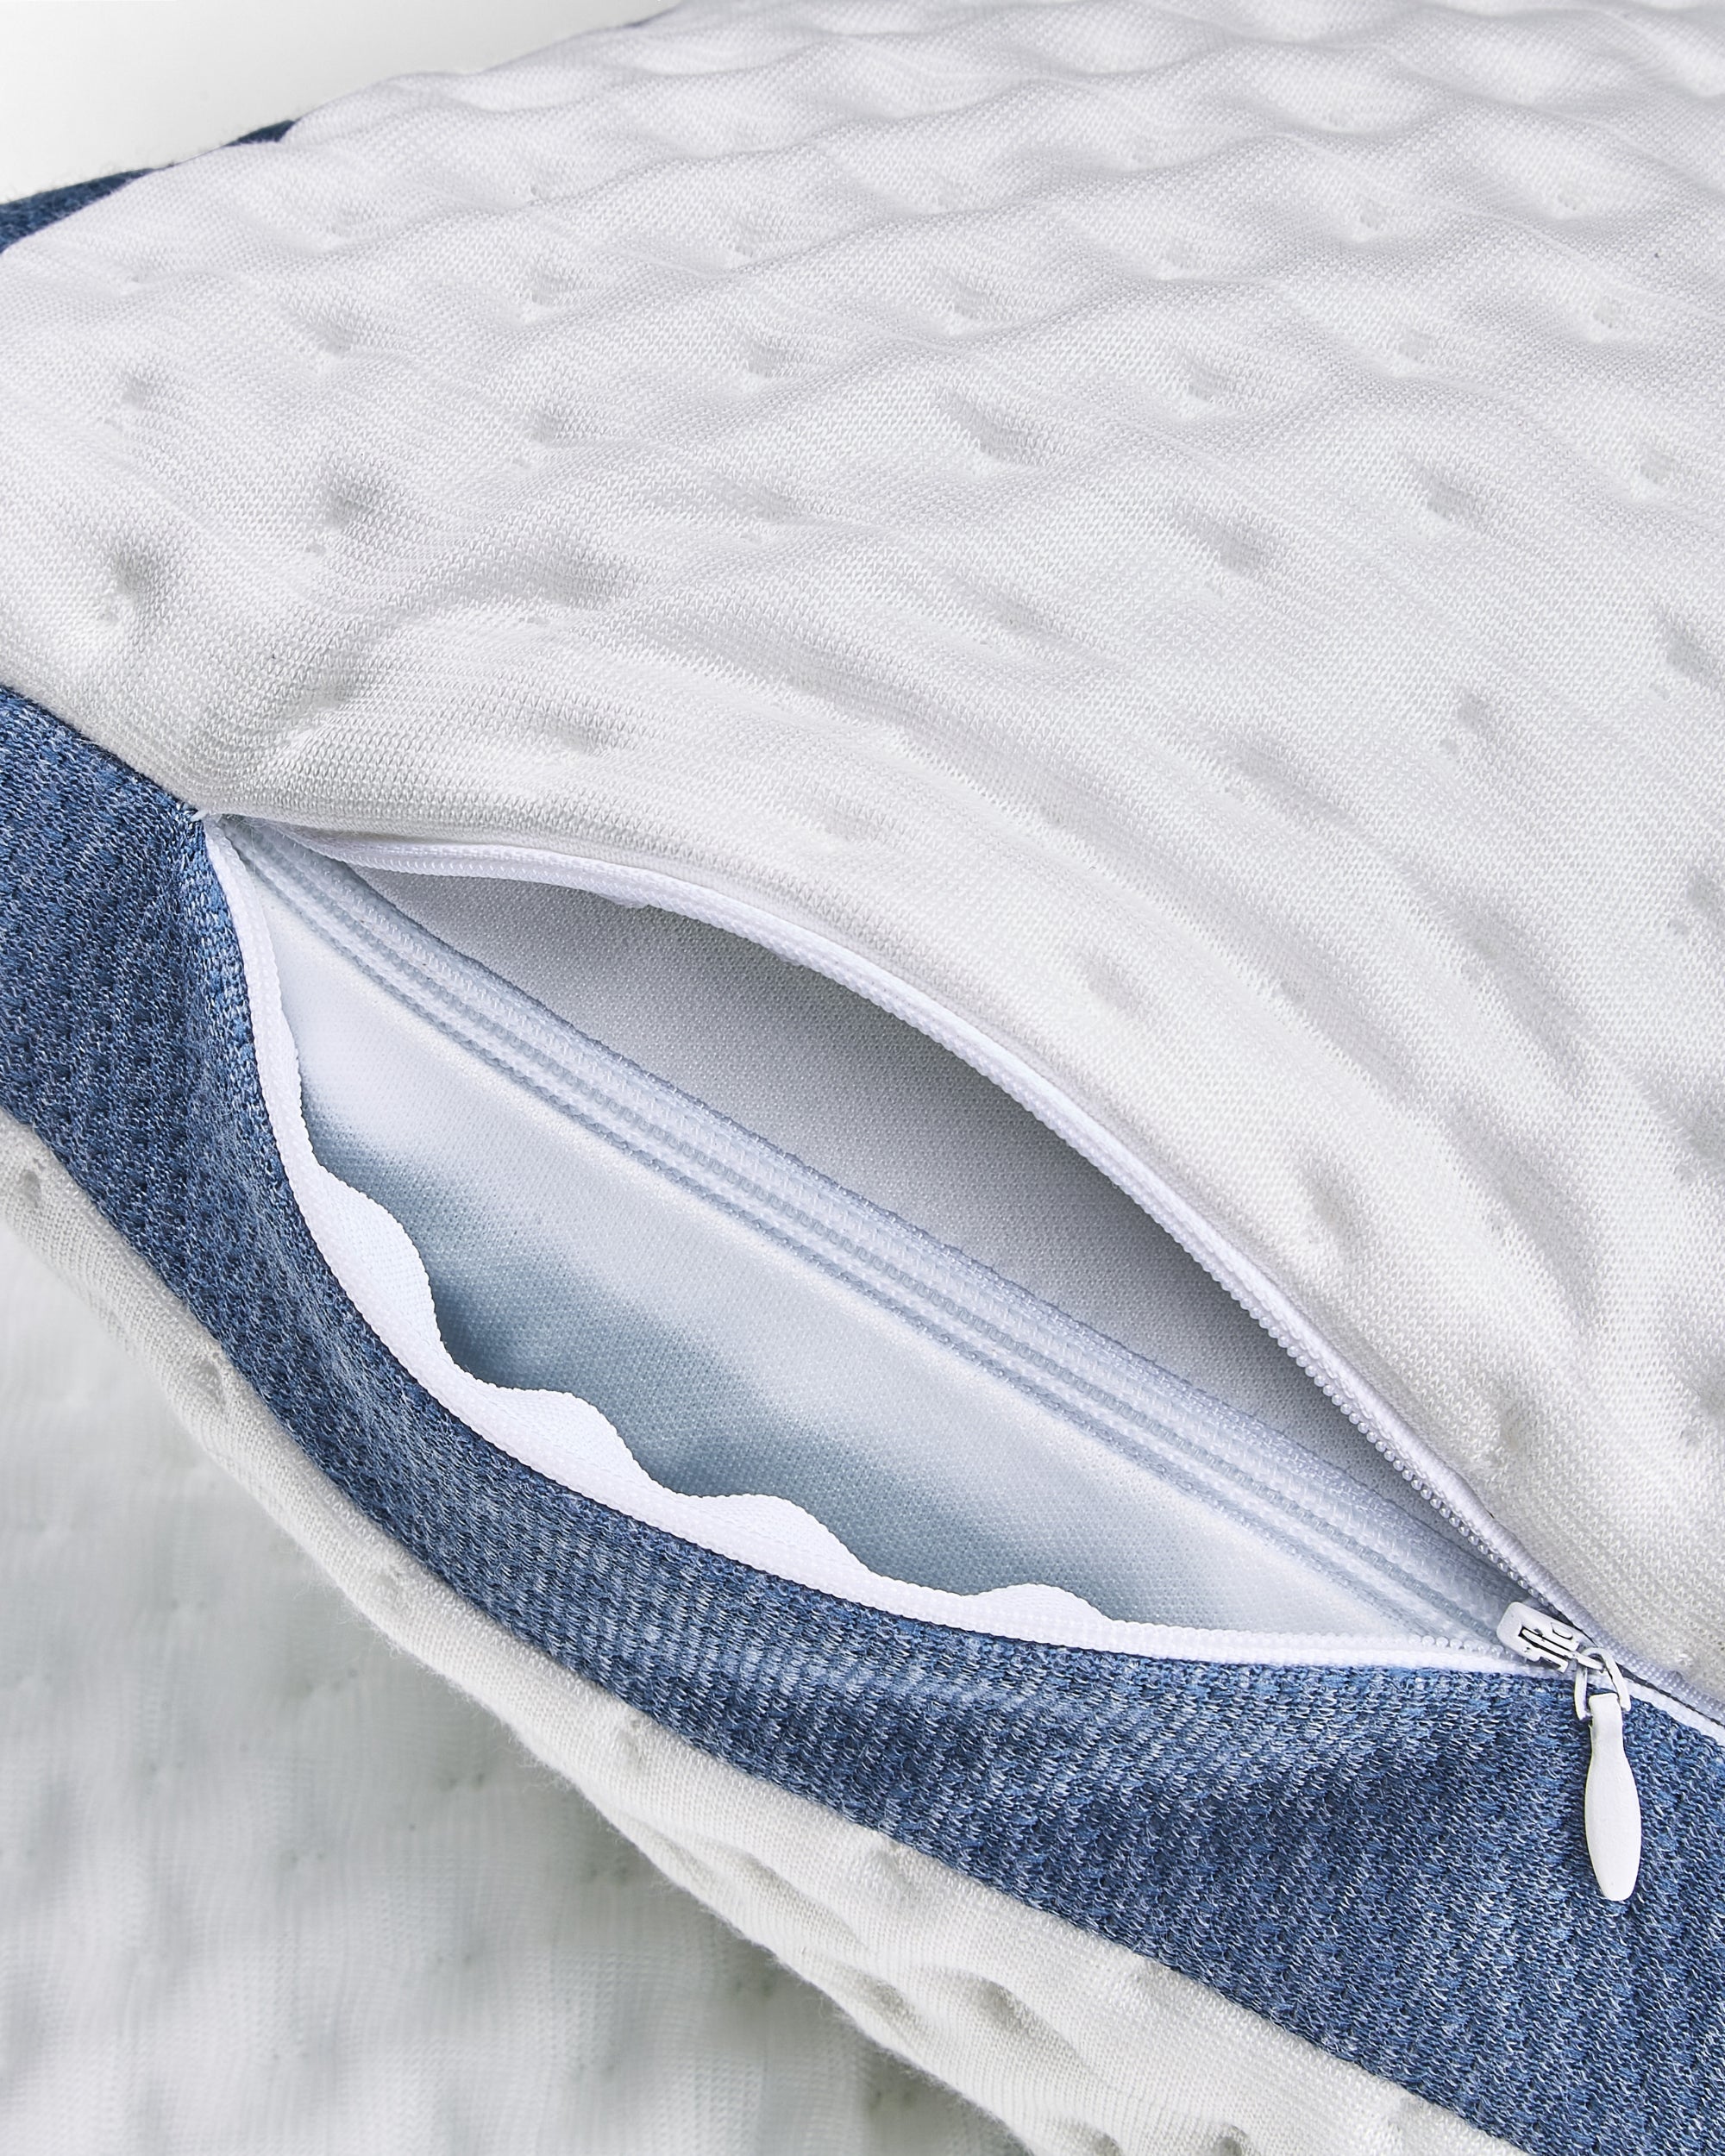 these made in america cooling pillows feature a side zipper so you can add or remove fill to get the perfect loft for you